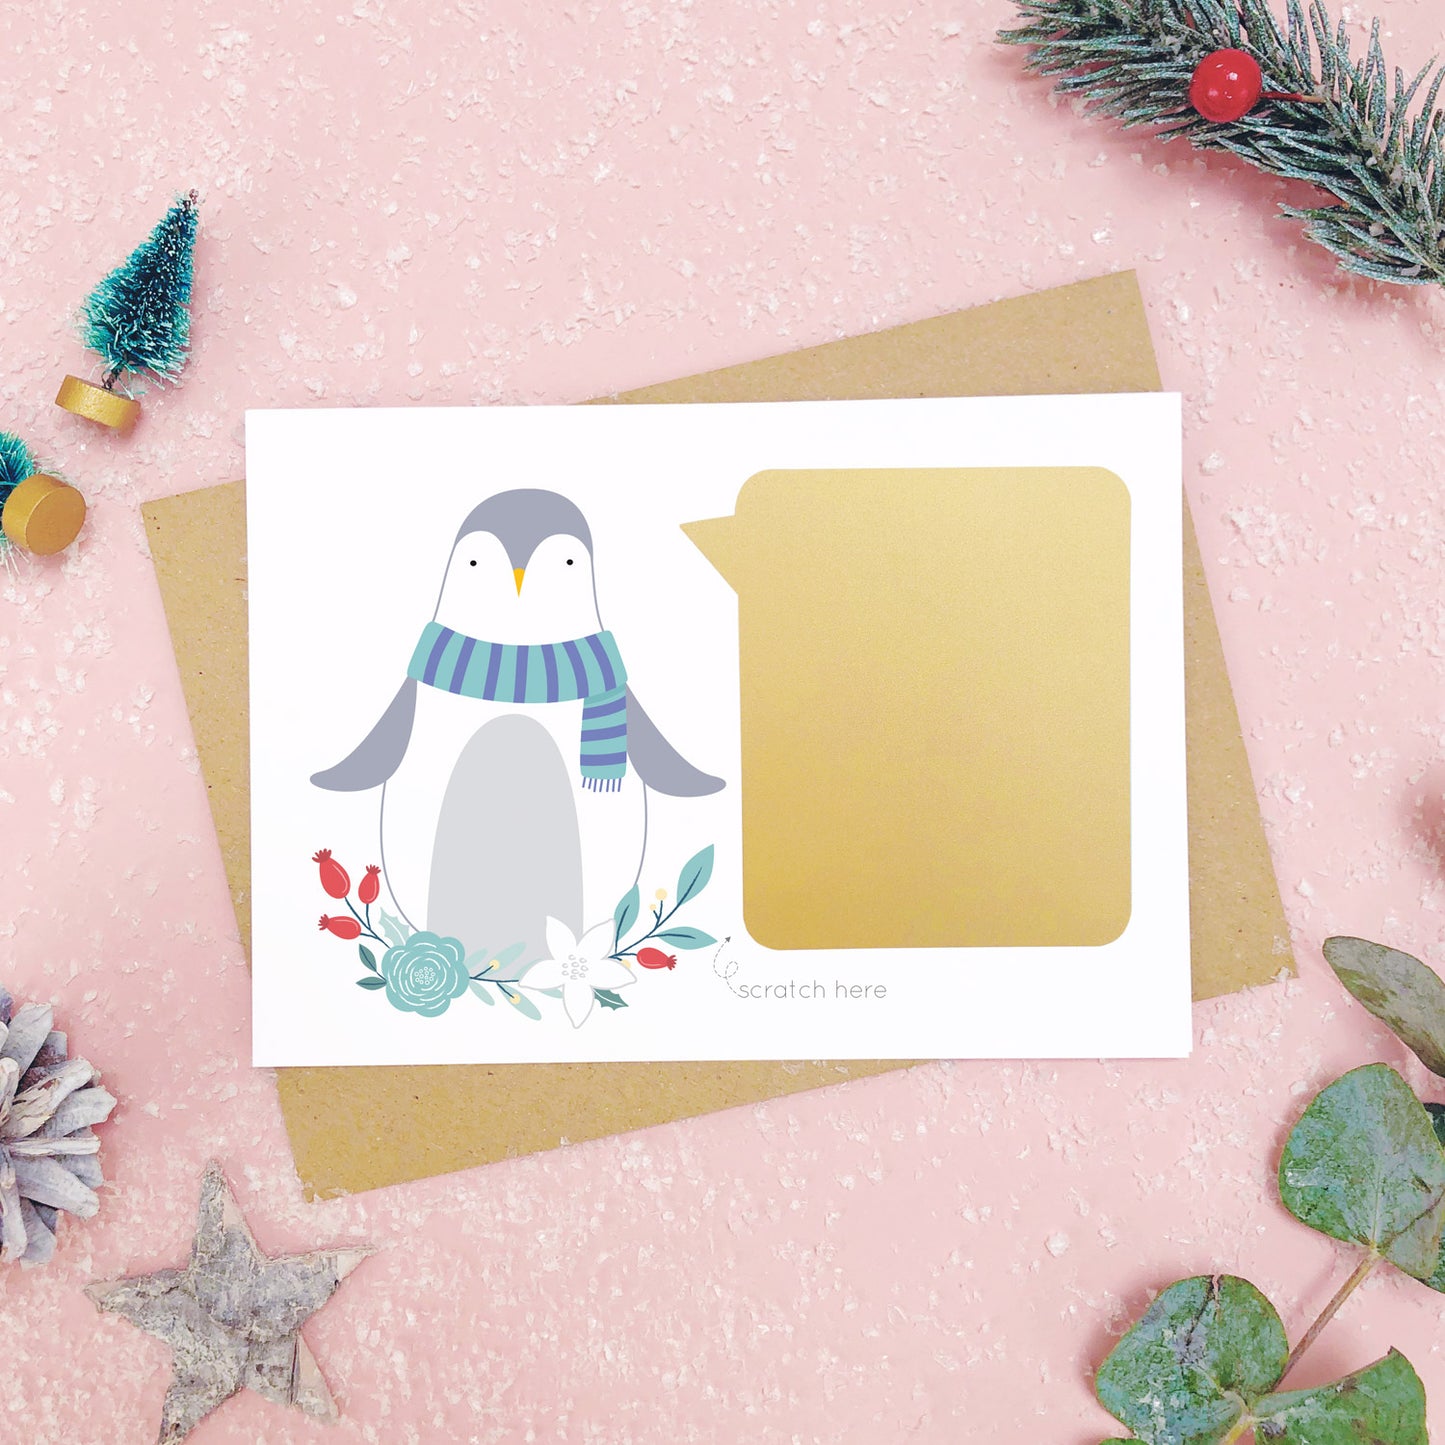 Penguin scratch card showing the gold panel after it has been stuck down. Shot on a pink background, surrounded with festive christmas props in tones of green and grey.